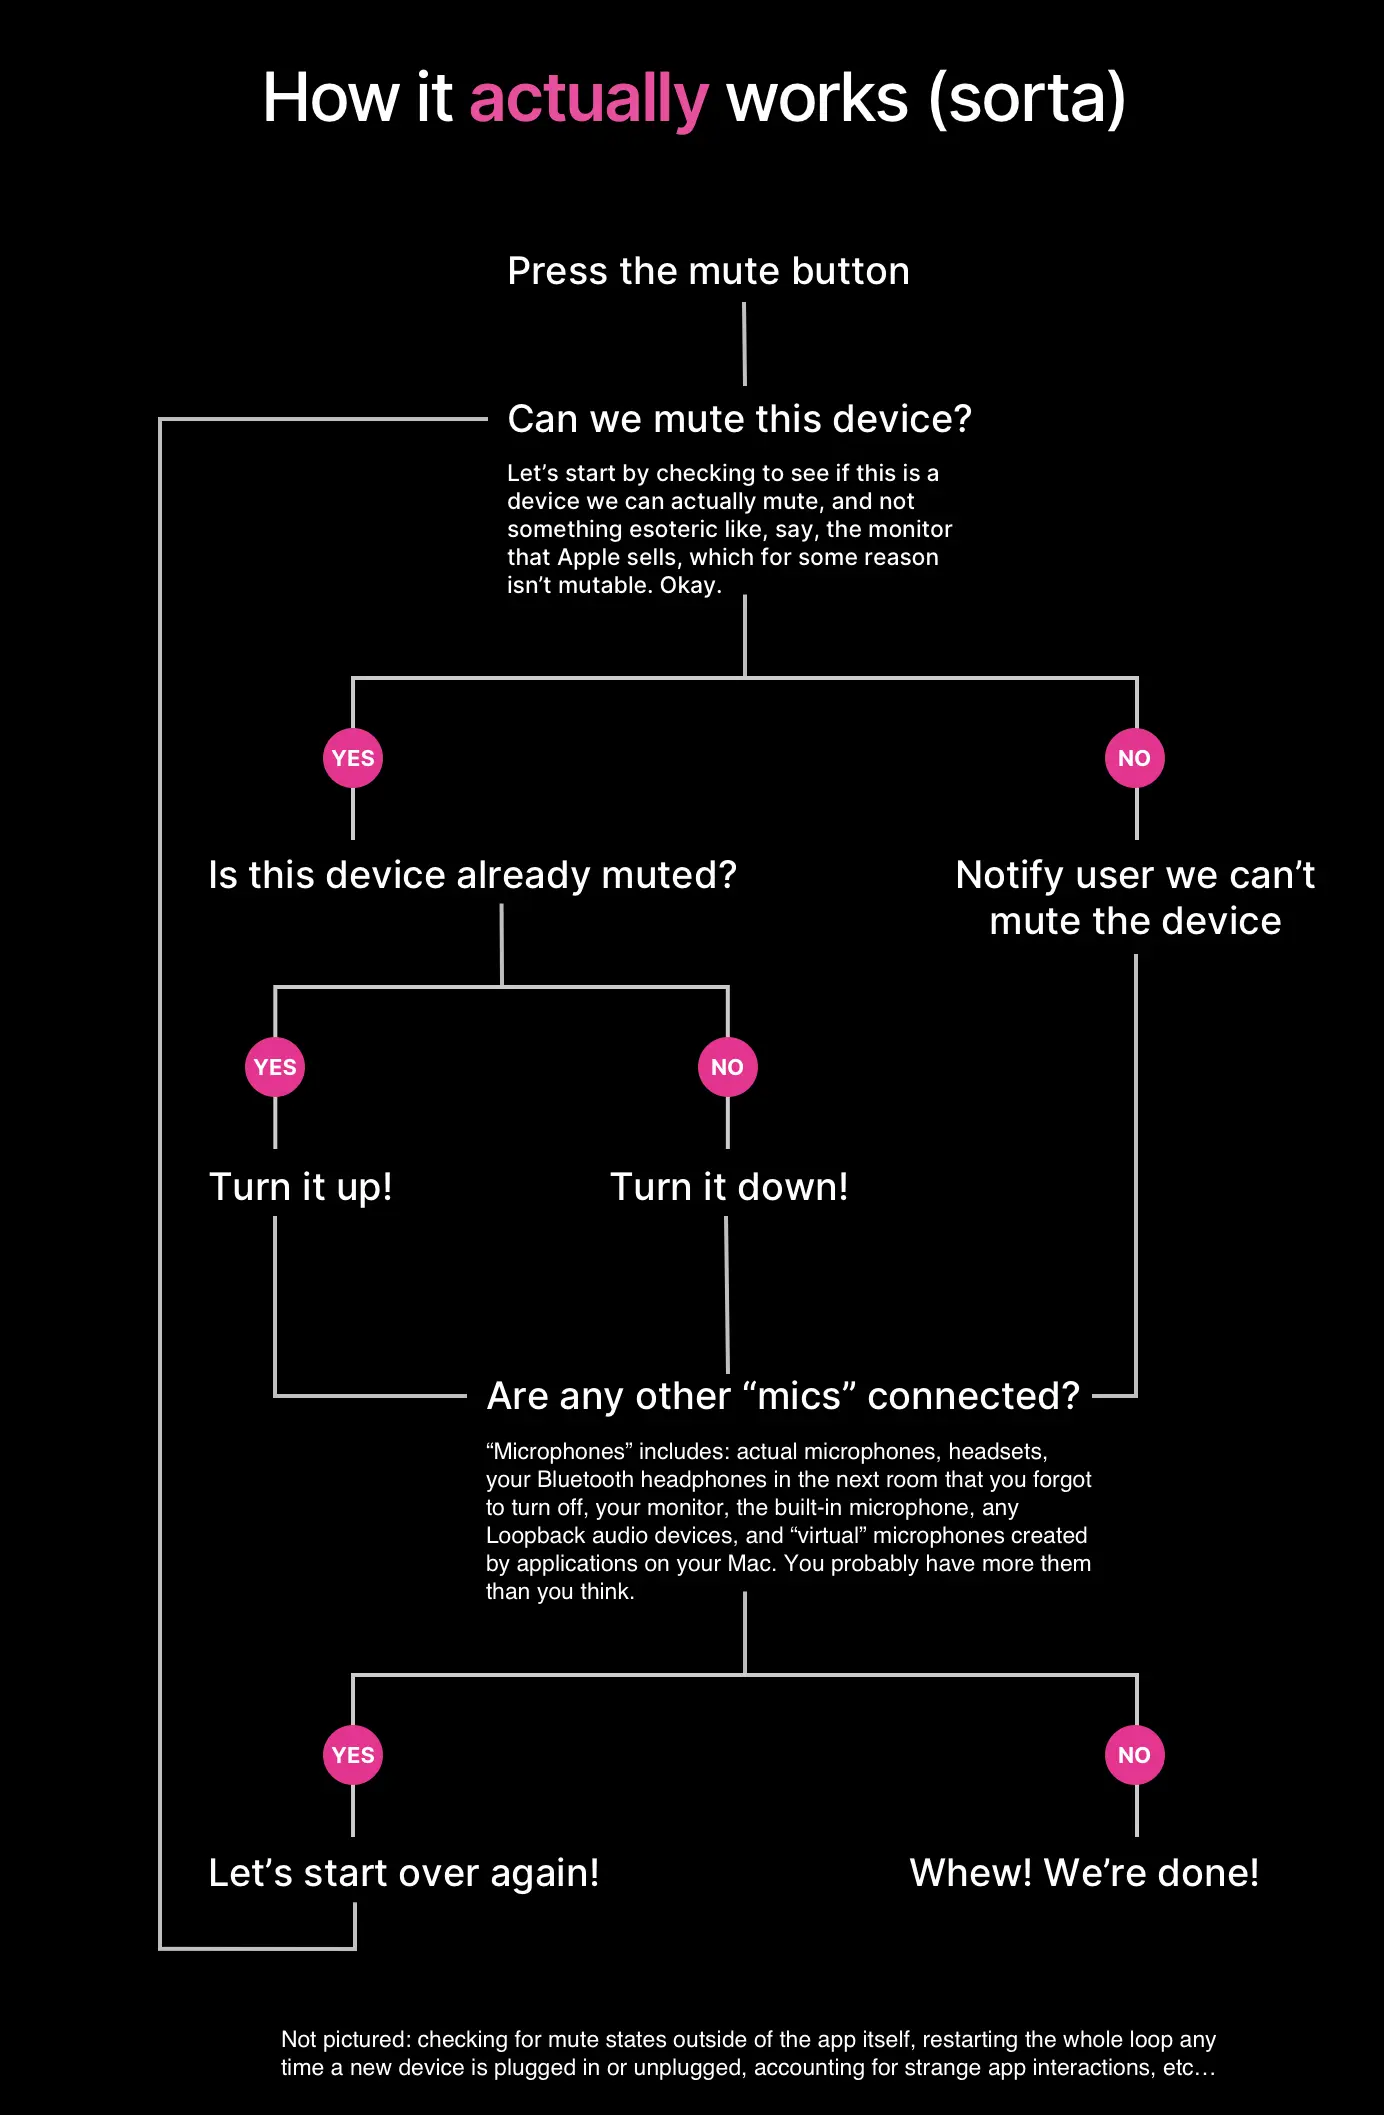 A flowchart showing the complex path by which muting a device actually works: press a button, and we first check to see if the device is mutable, then check if it's already muted, then repeat for all other devices connected.